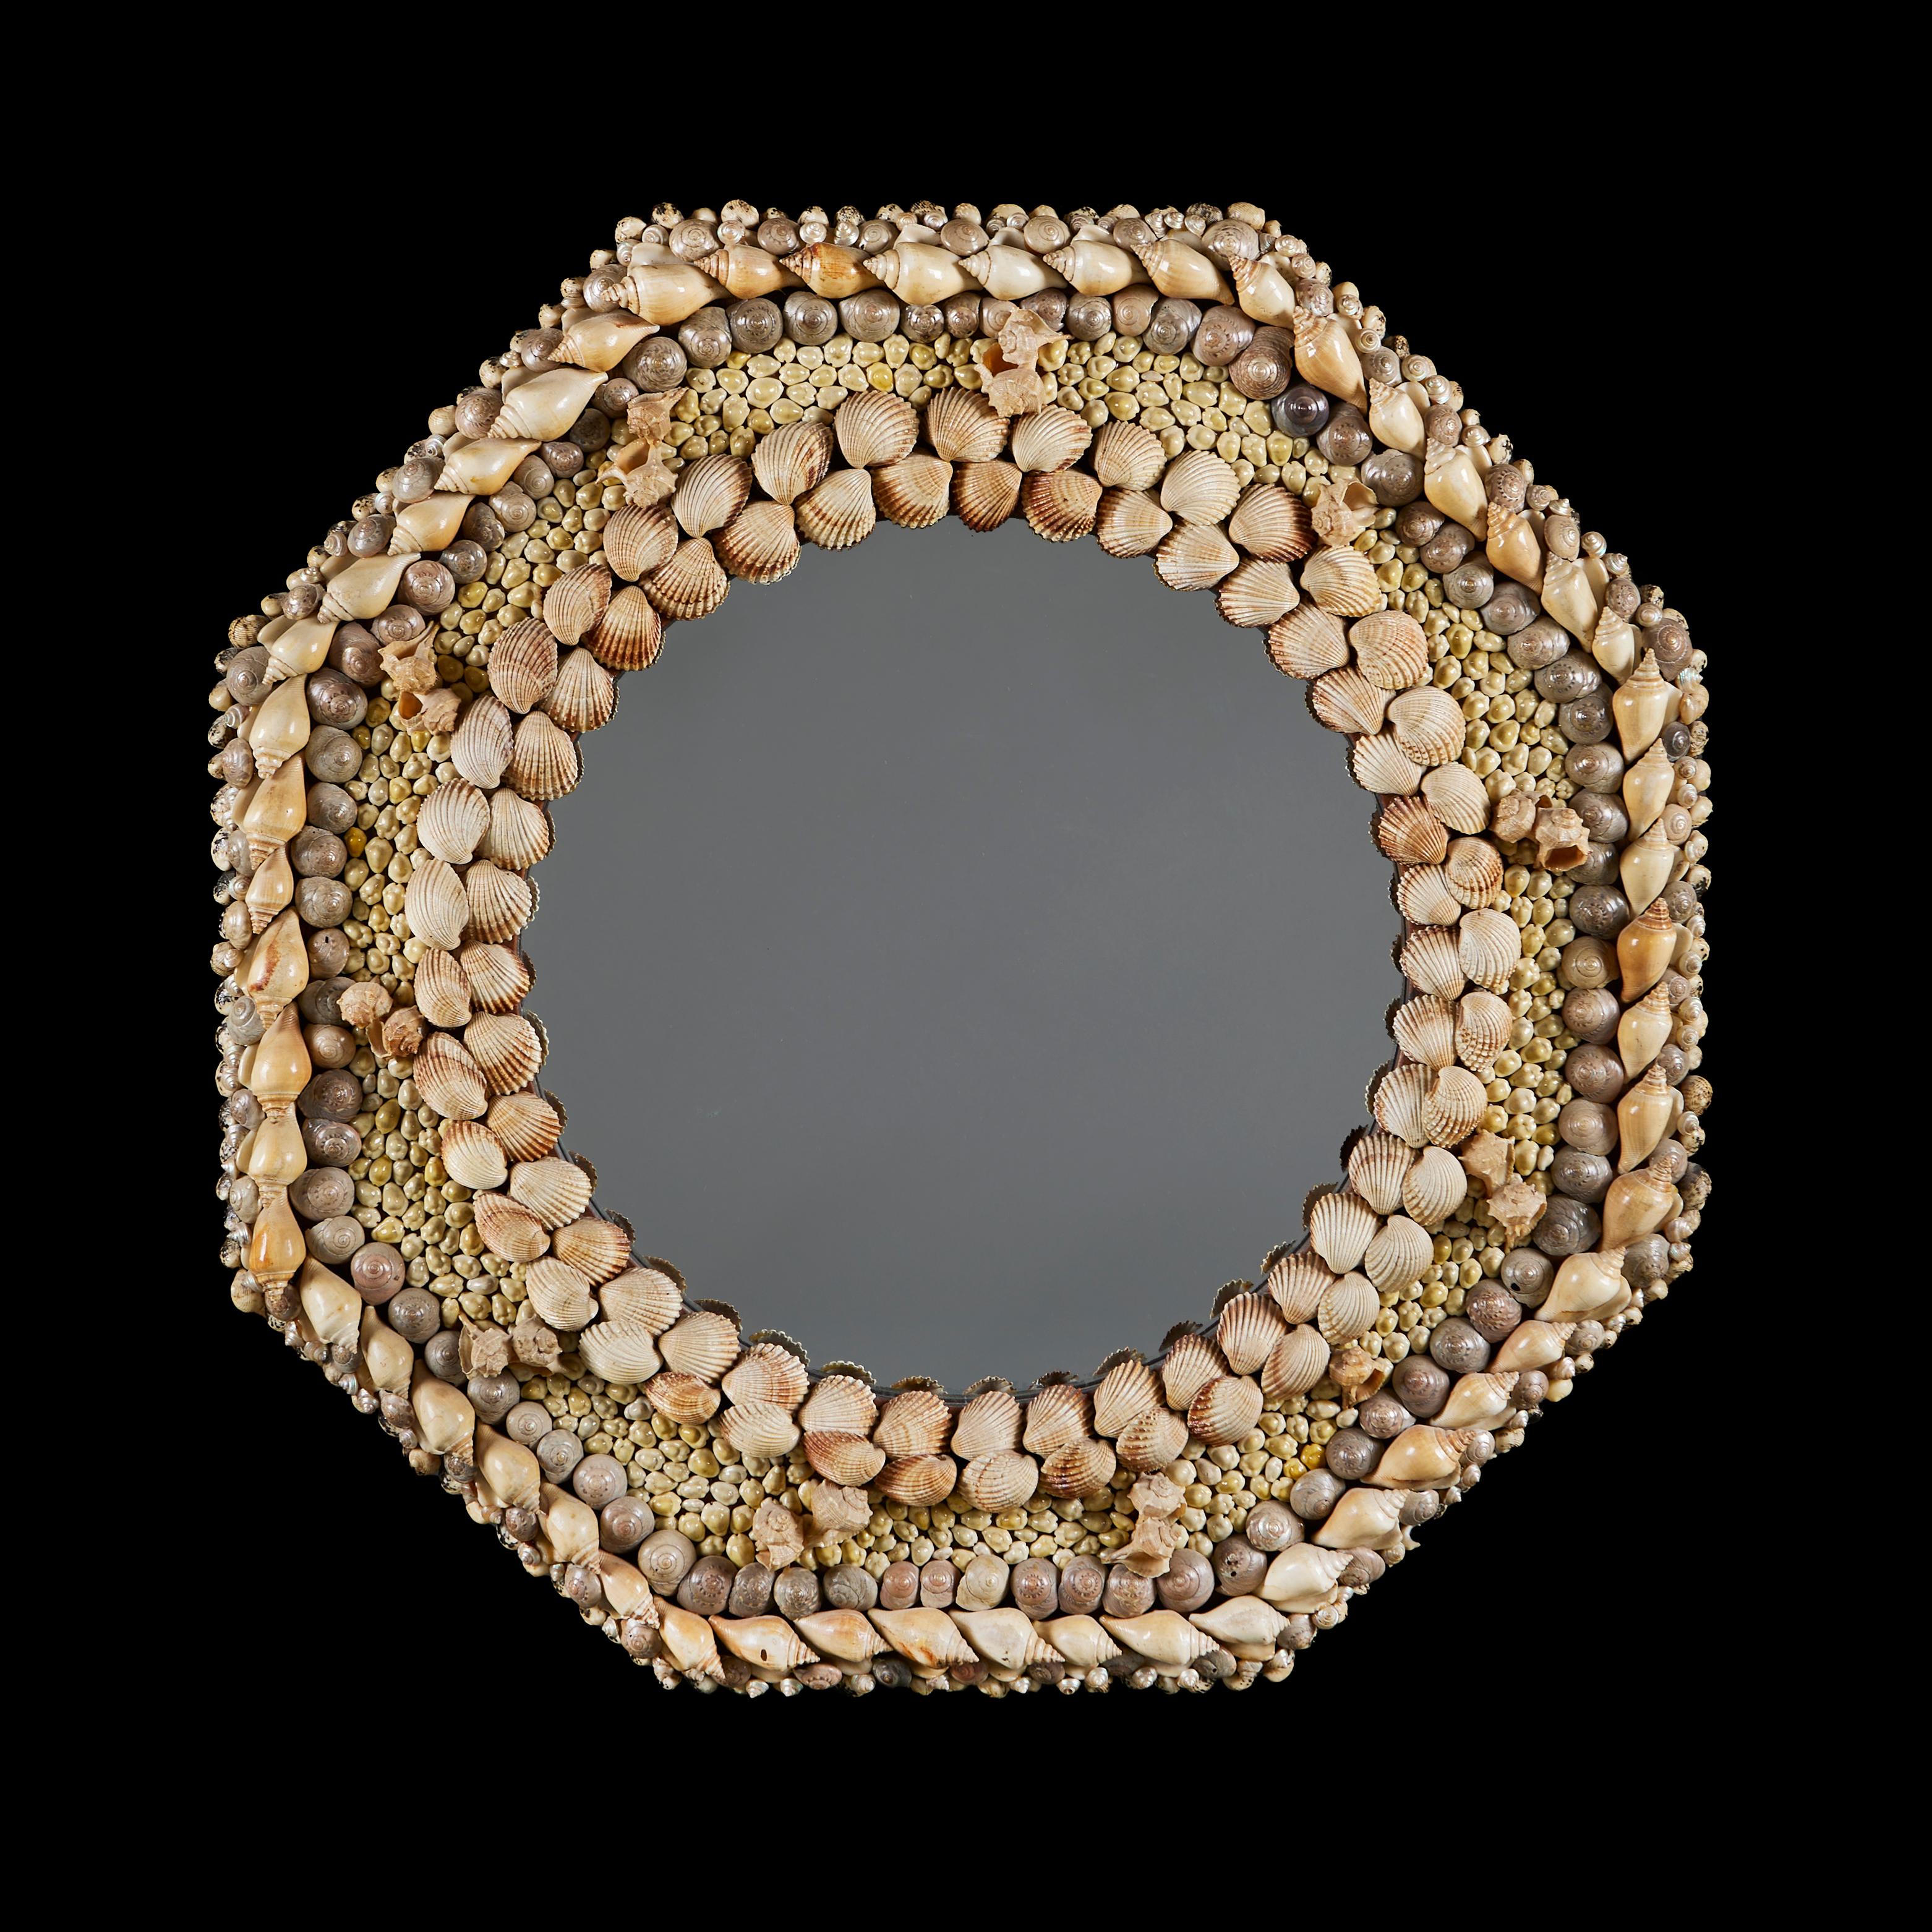 England, circa 1940
An unusual early twentieth century hexagonal mirror with shell decoration throughout, the whimsical shell frame surrounding a circular mirror plate. 

Height   74.00cm
Width    74.00cm